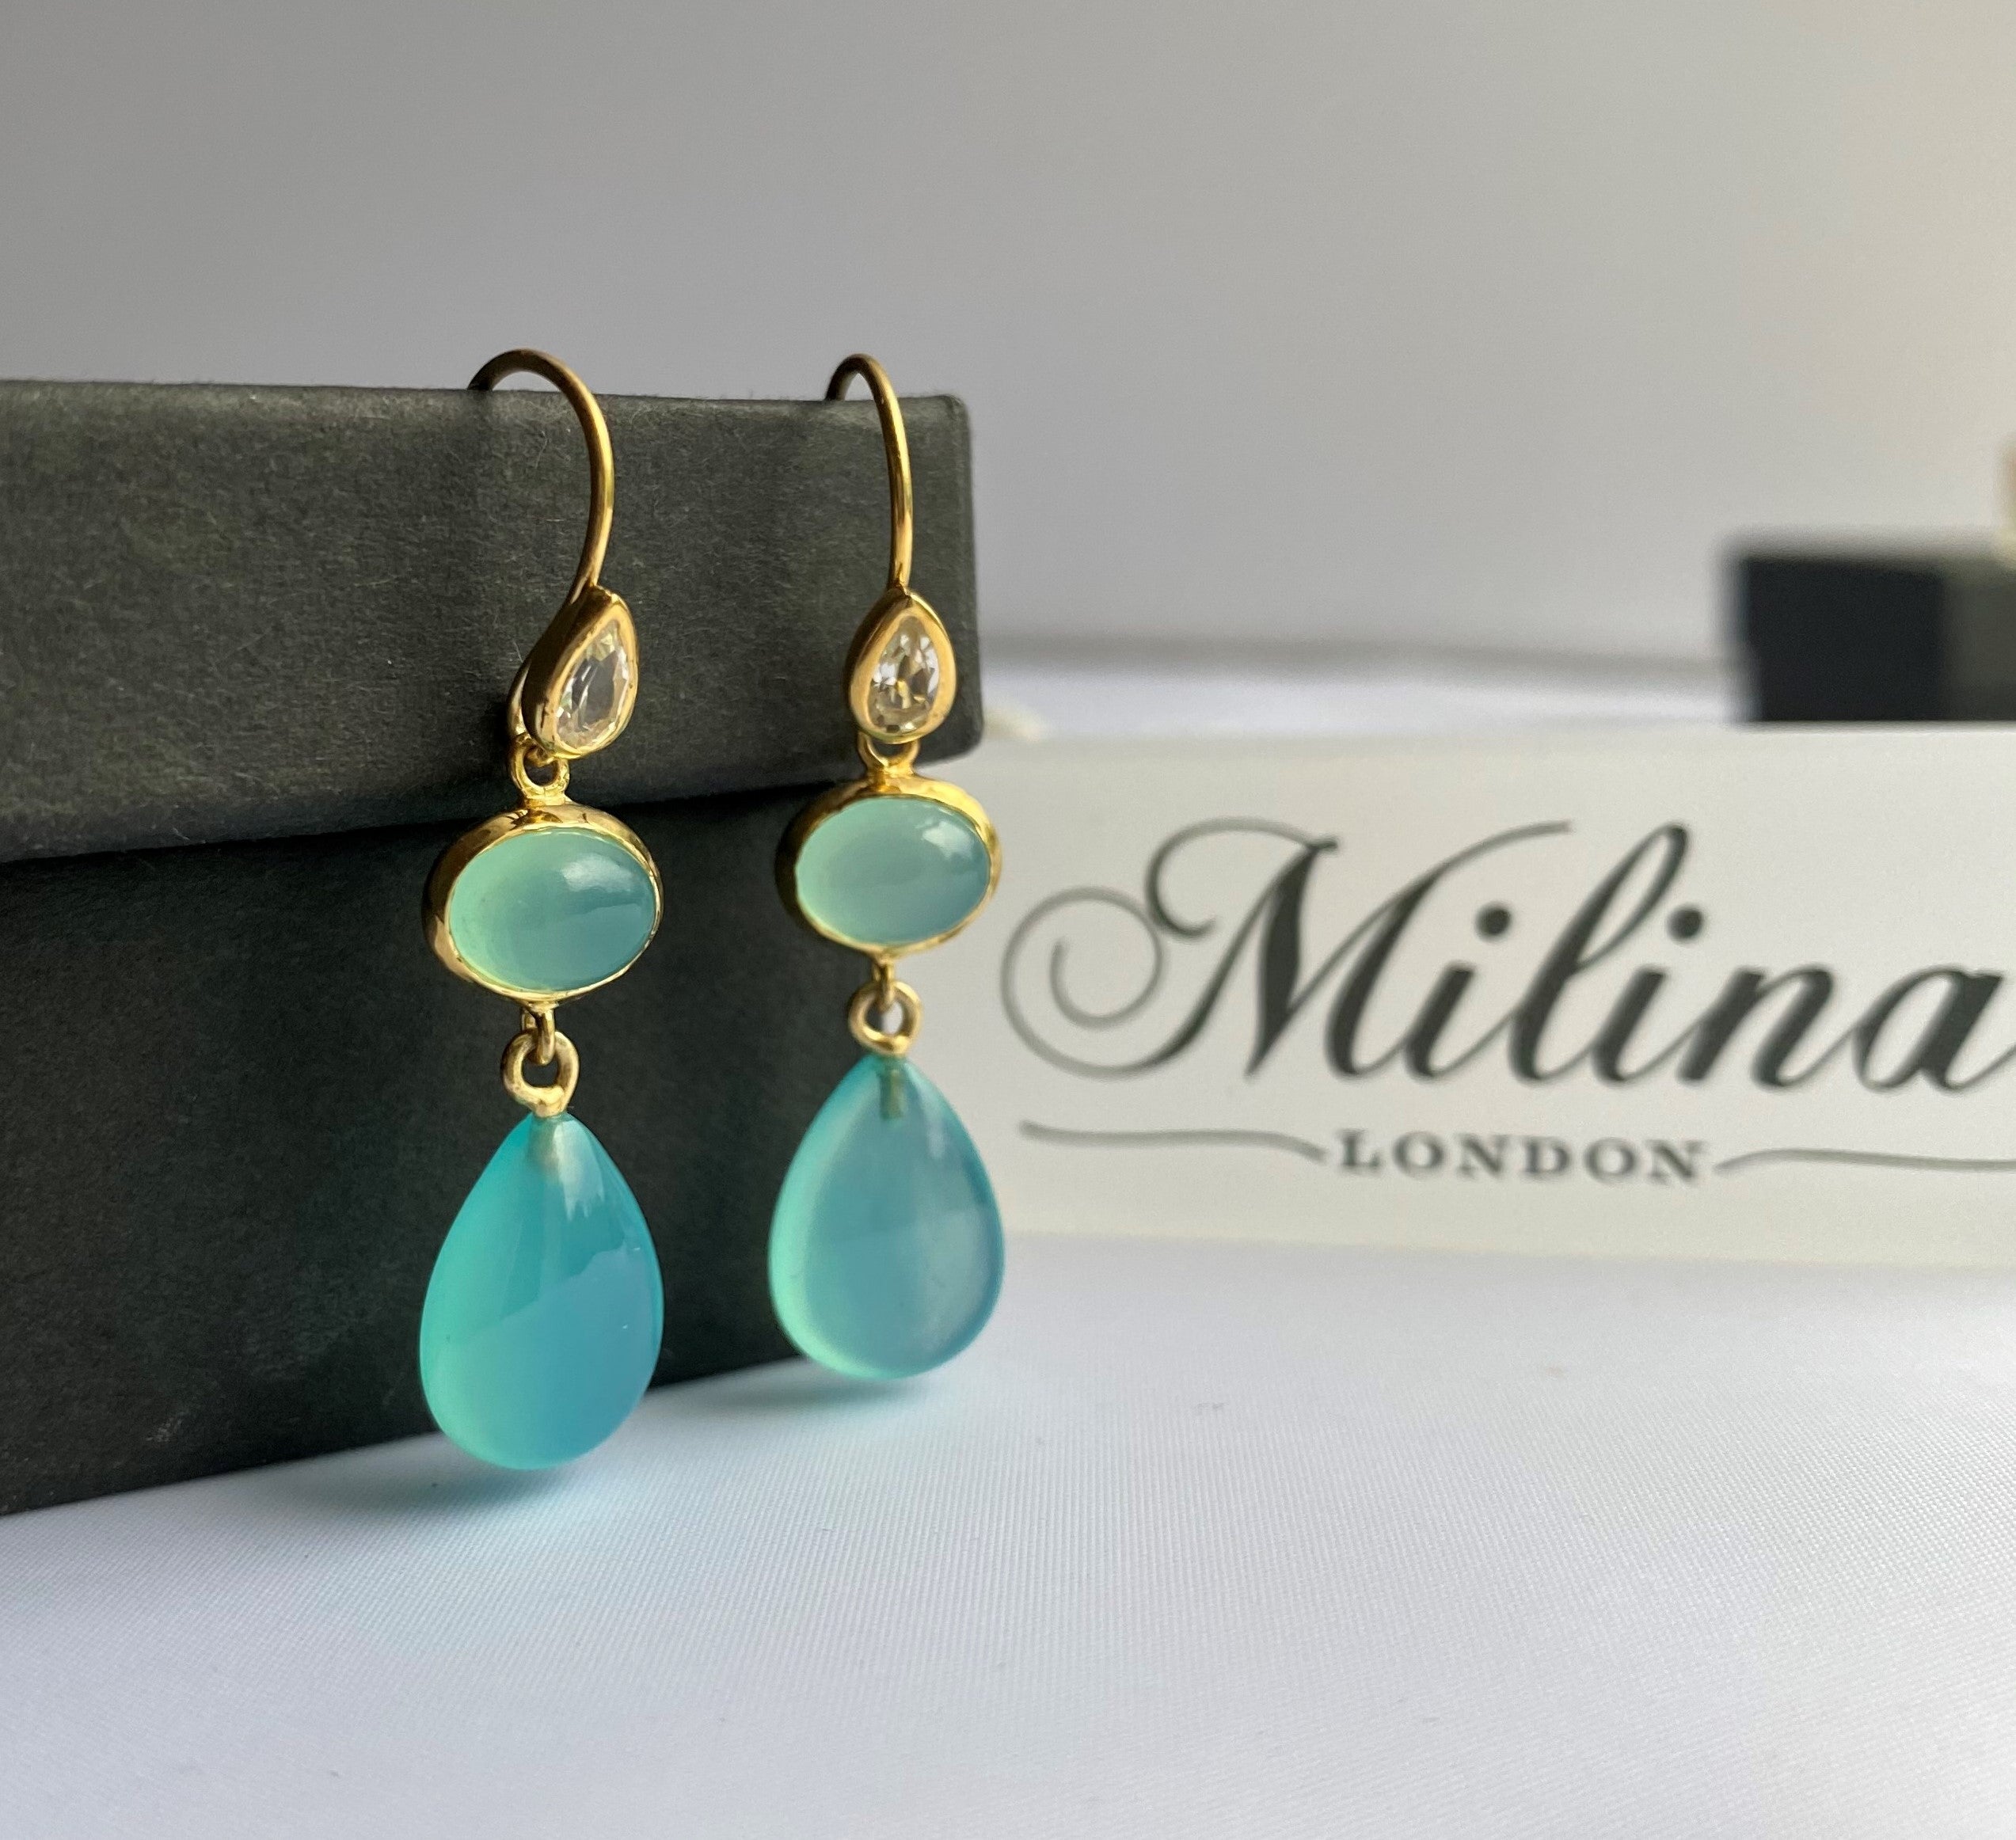 Long Hook Earrings 3 Stones - Faceted Rock Crystal, Cabochon Blue Topaz & Cabochon Aqua Chalcedony